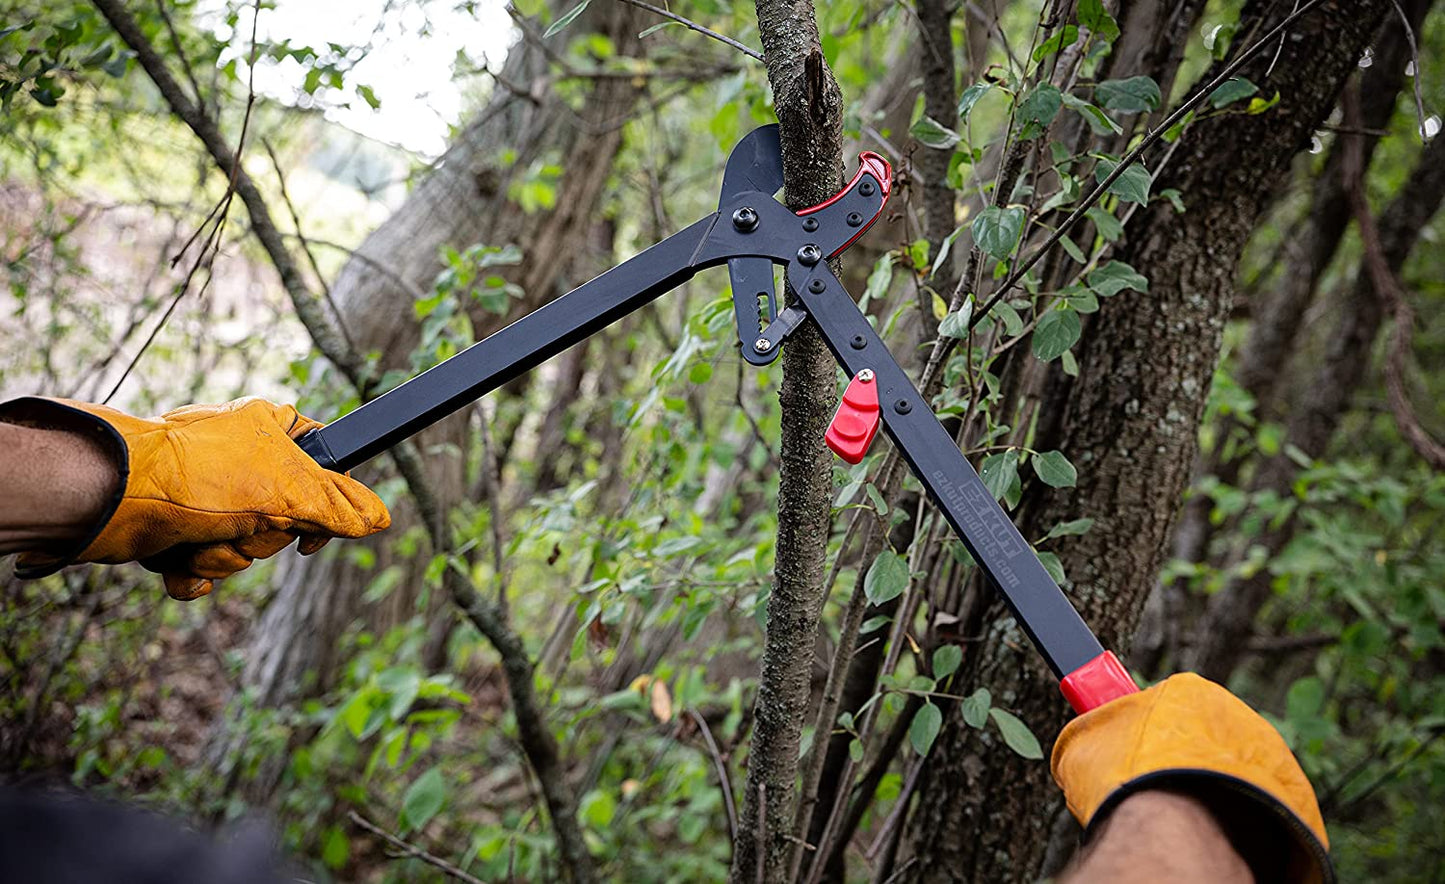 Kut Lil G Ratchet Tree Loppers Ratchet Function - Sub Compact Lightweight Loppers and Pruners Heavy Duty Ultra Packable Loppers Tree Trimmer Tree Pruner - Best Gardening Limb Loppers Since 1988